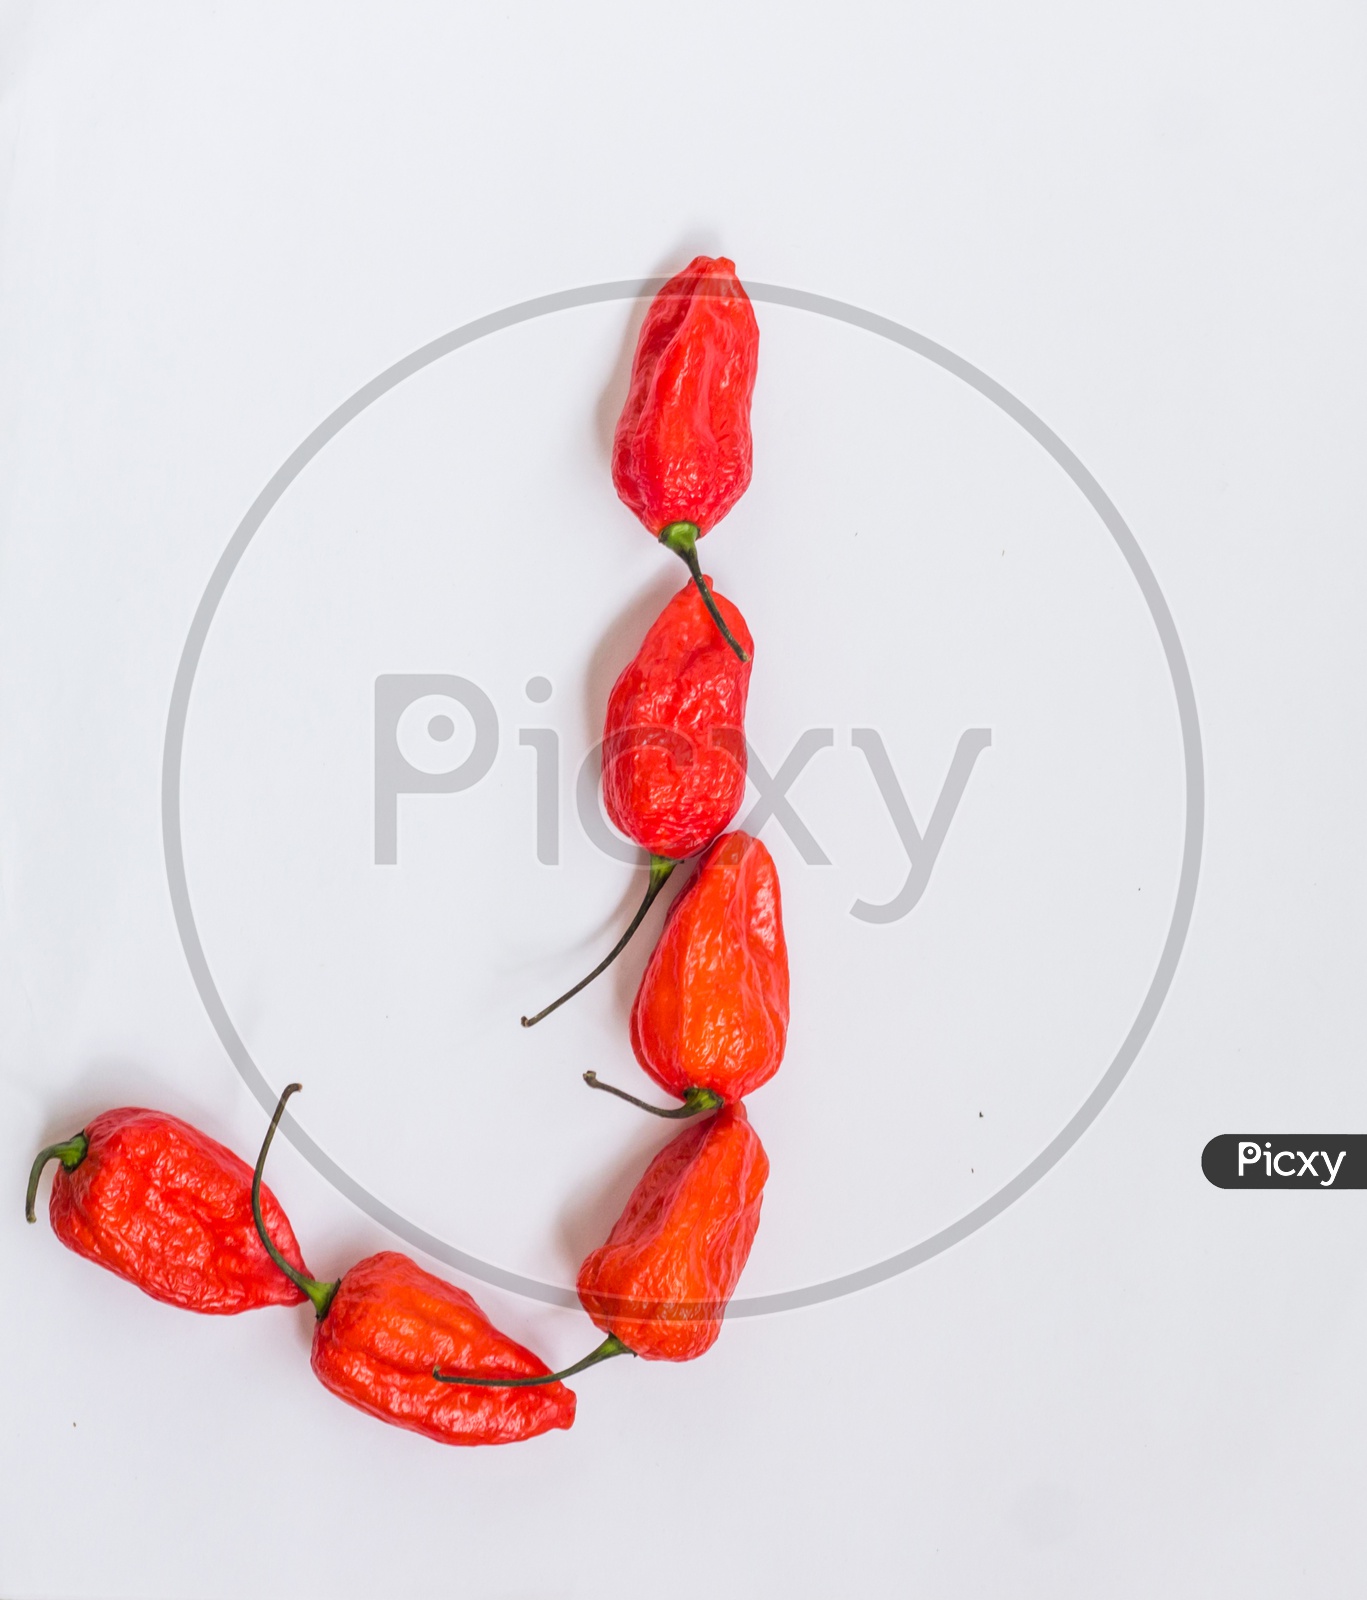 Letter J Alphabet Made With Ghost Pepper Bhoot Jolokia Over White Background